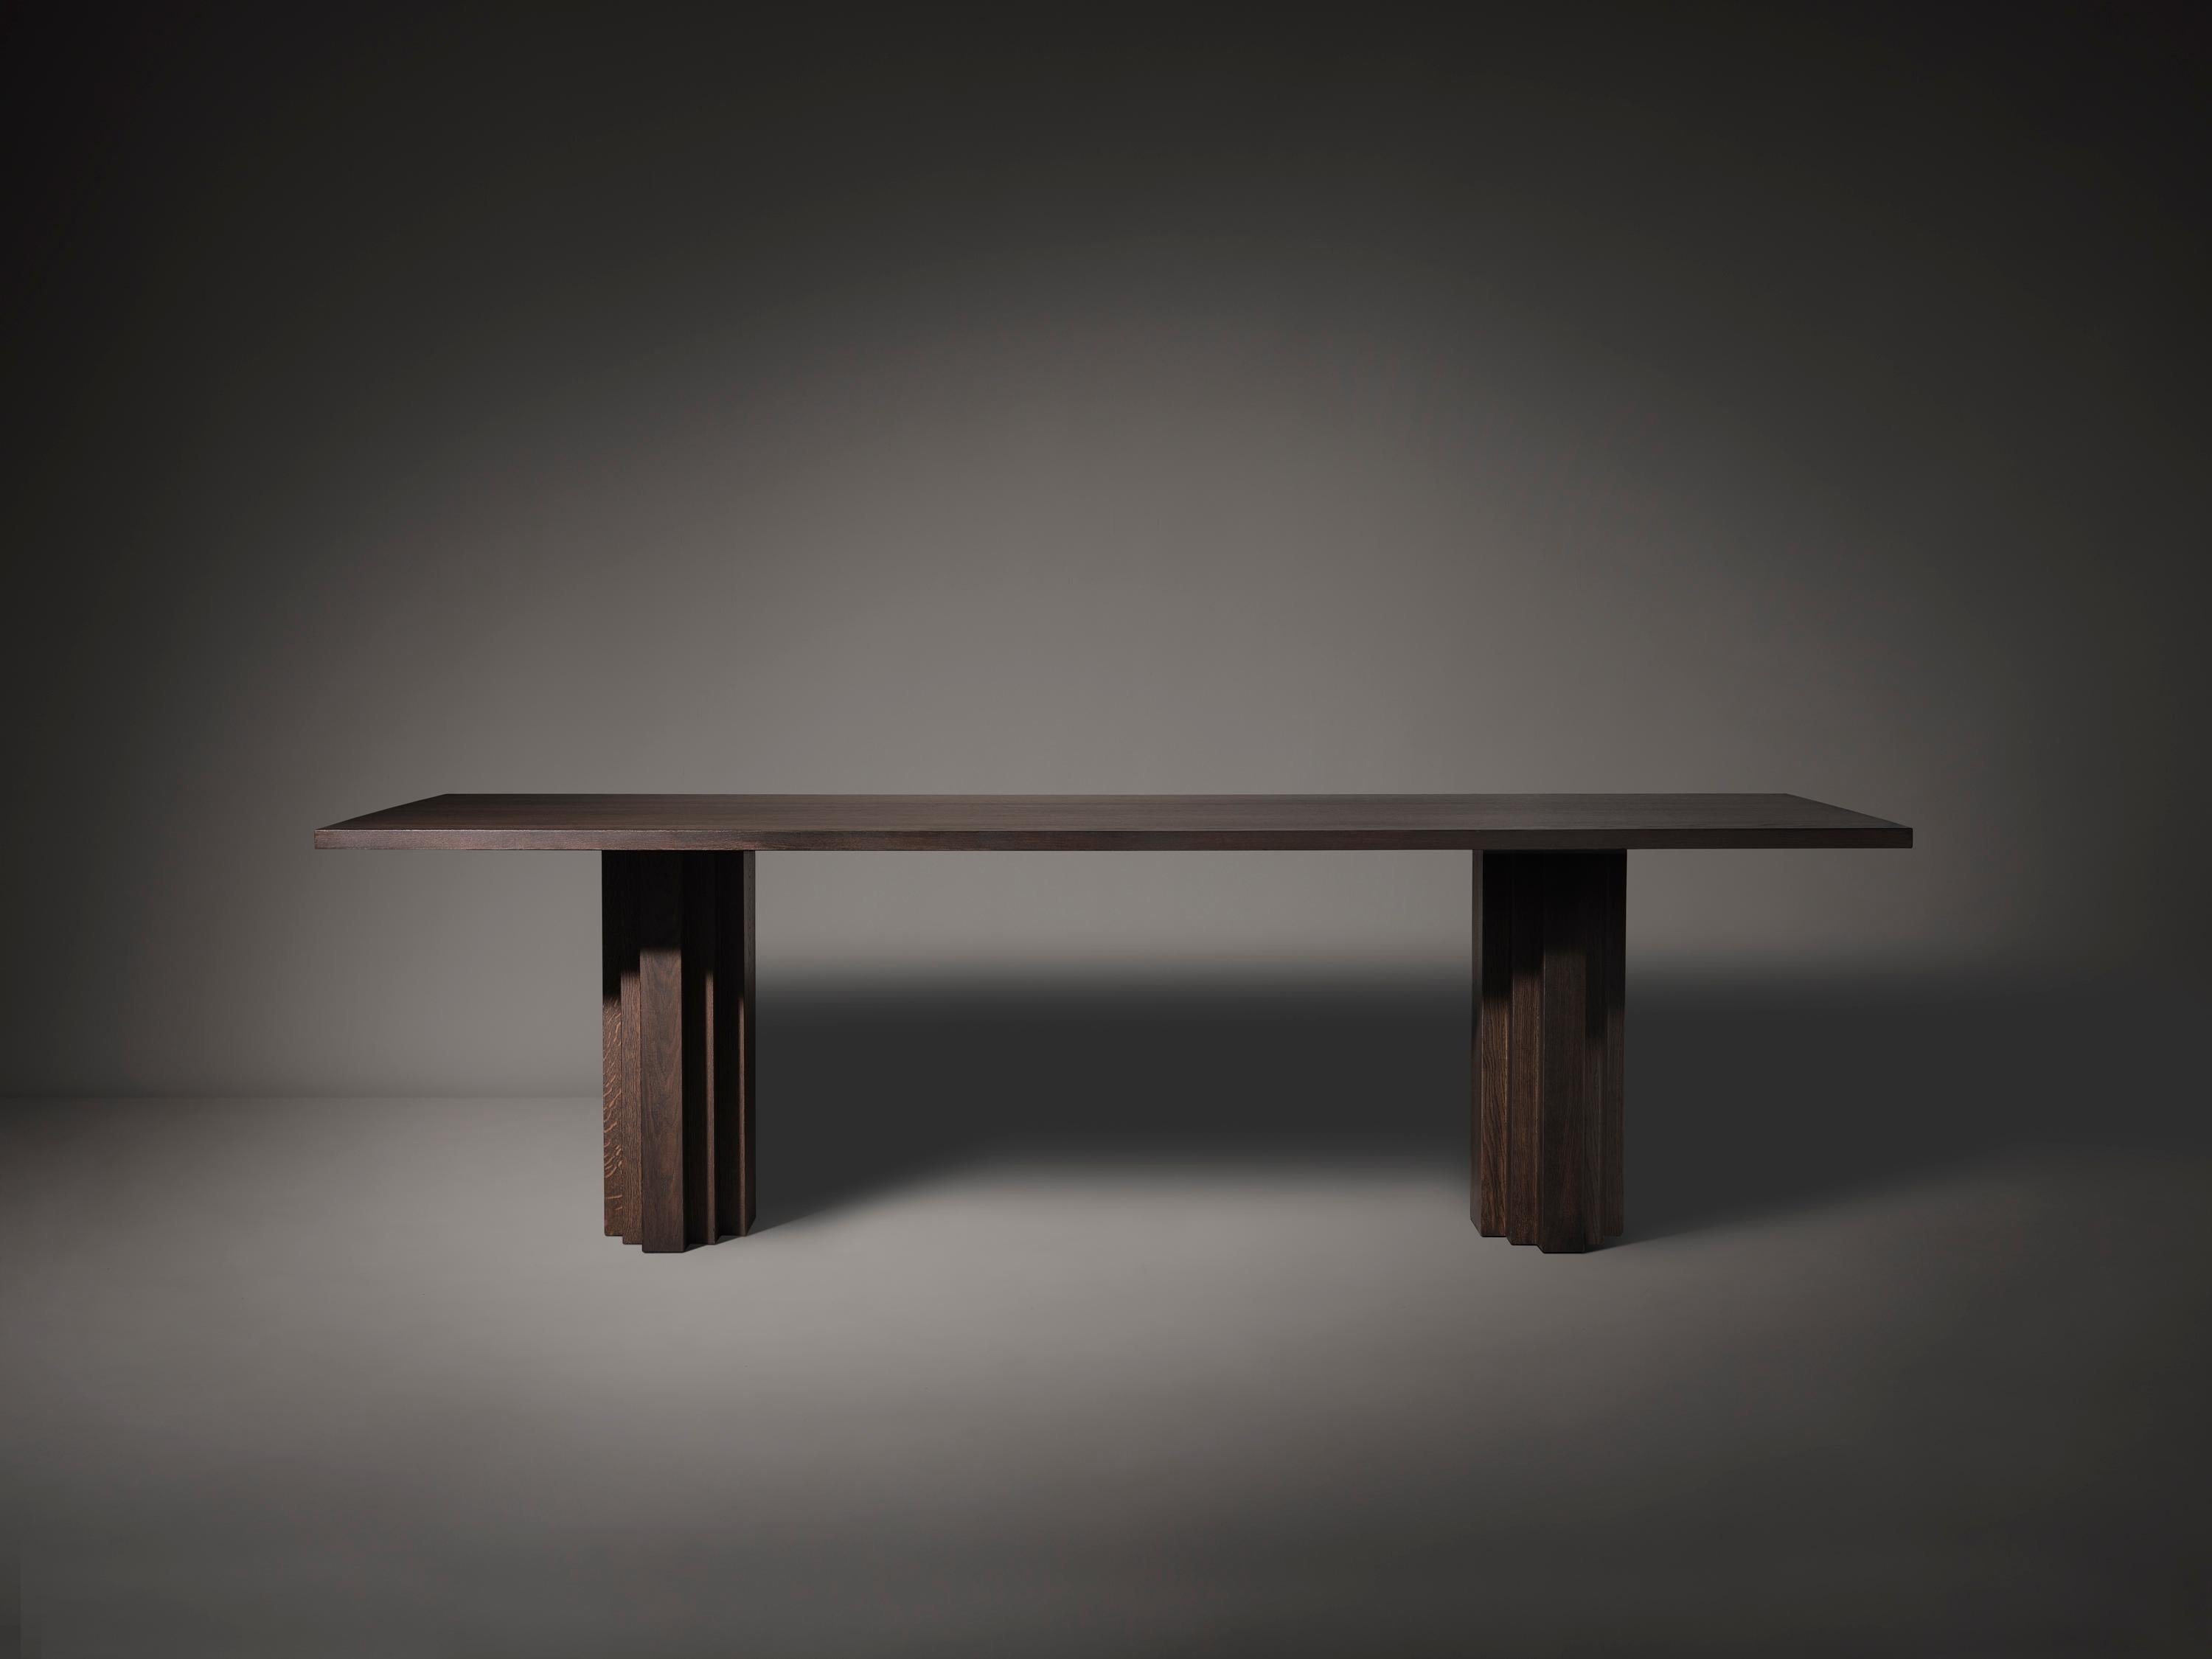 The Brut Slim table takes cues from Brutalism and Amsterdam School architecture. Designed by Aad Bos and crafted in the Netherlands. The Brut Slim table is the slimmer version of the Brut Table.

Mokko is an Amsterdam based design studio with a